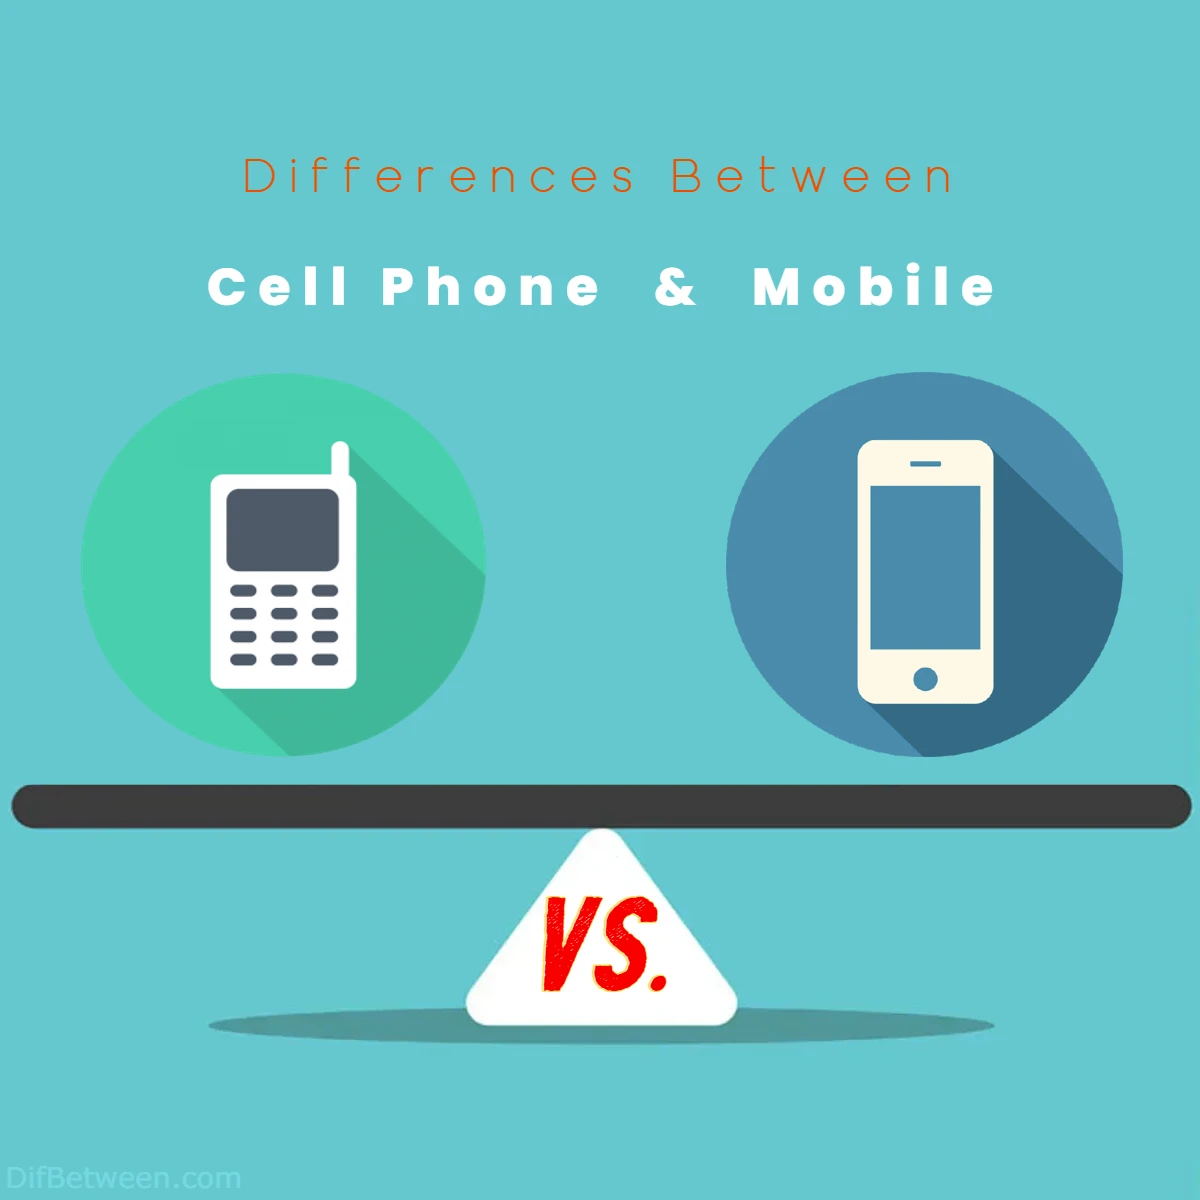 Differences Between Cell Phone vs Mobile